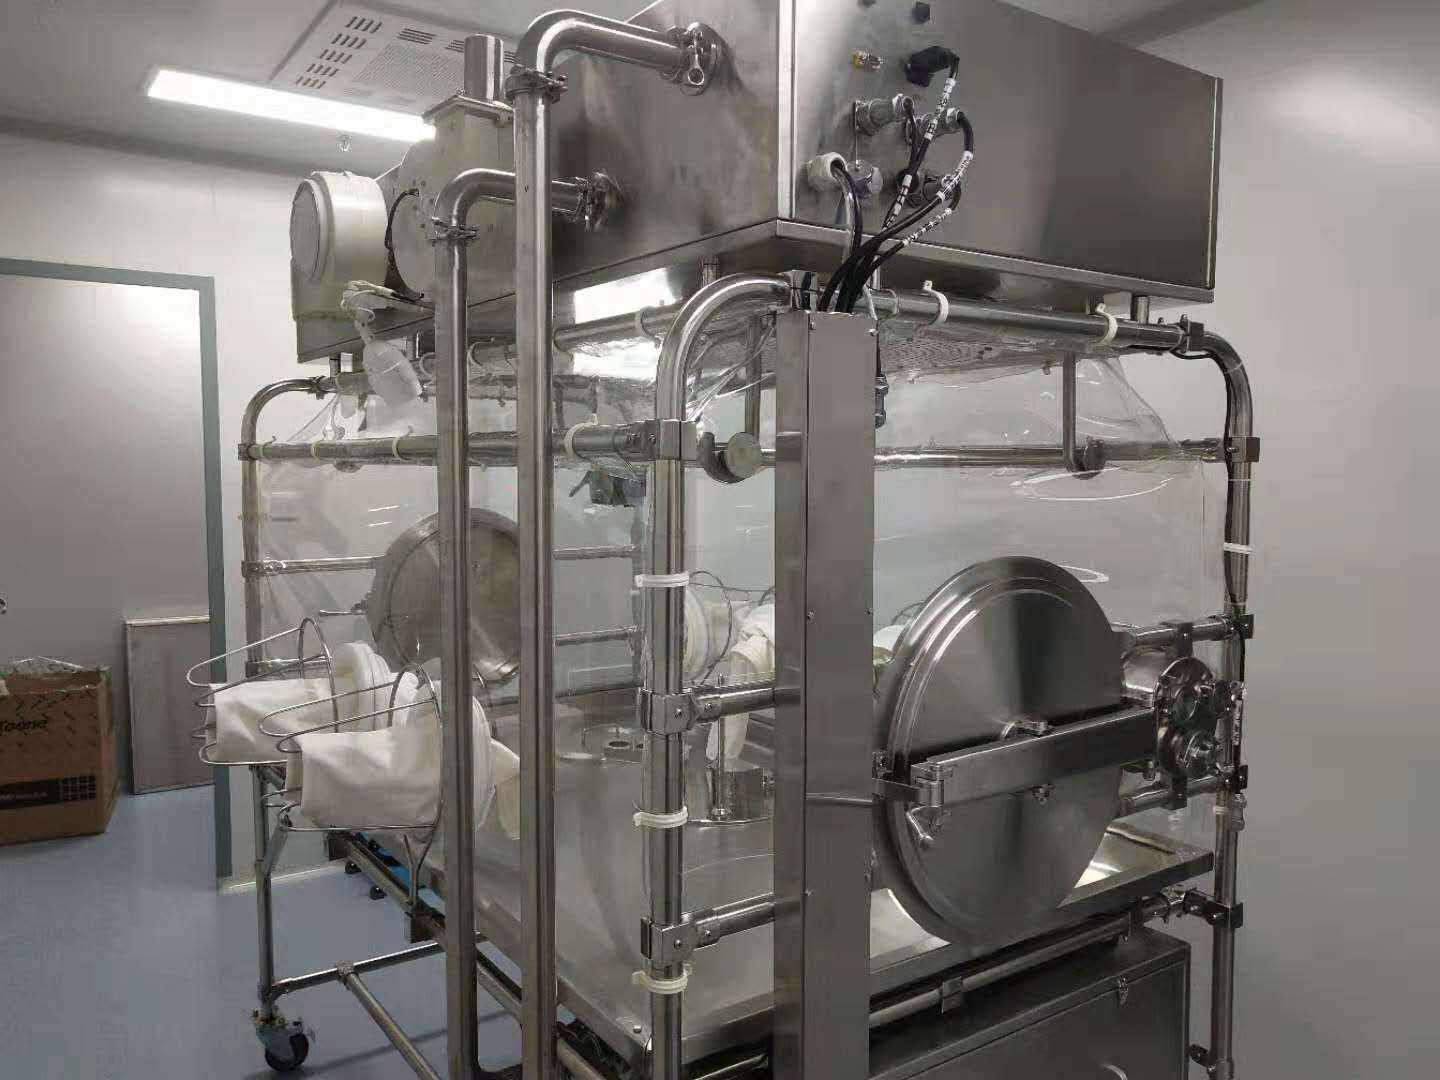 TOONE Aseptic Isolator Sterility Test containment System With PVC Soft Chamber sterile Isolator